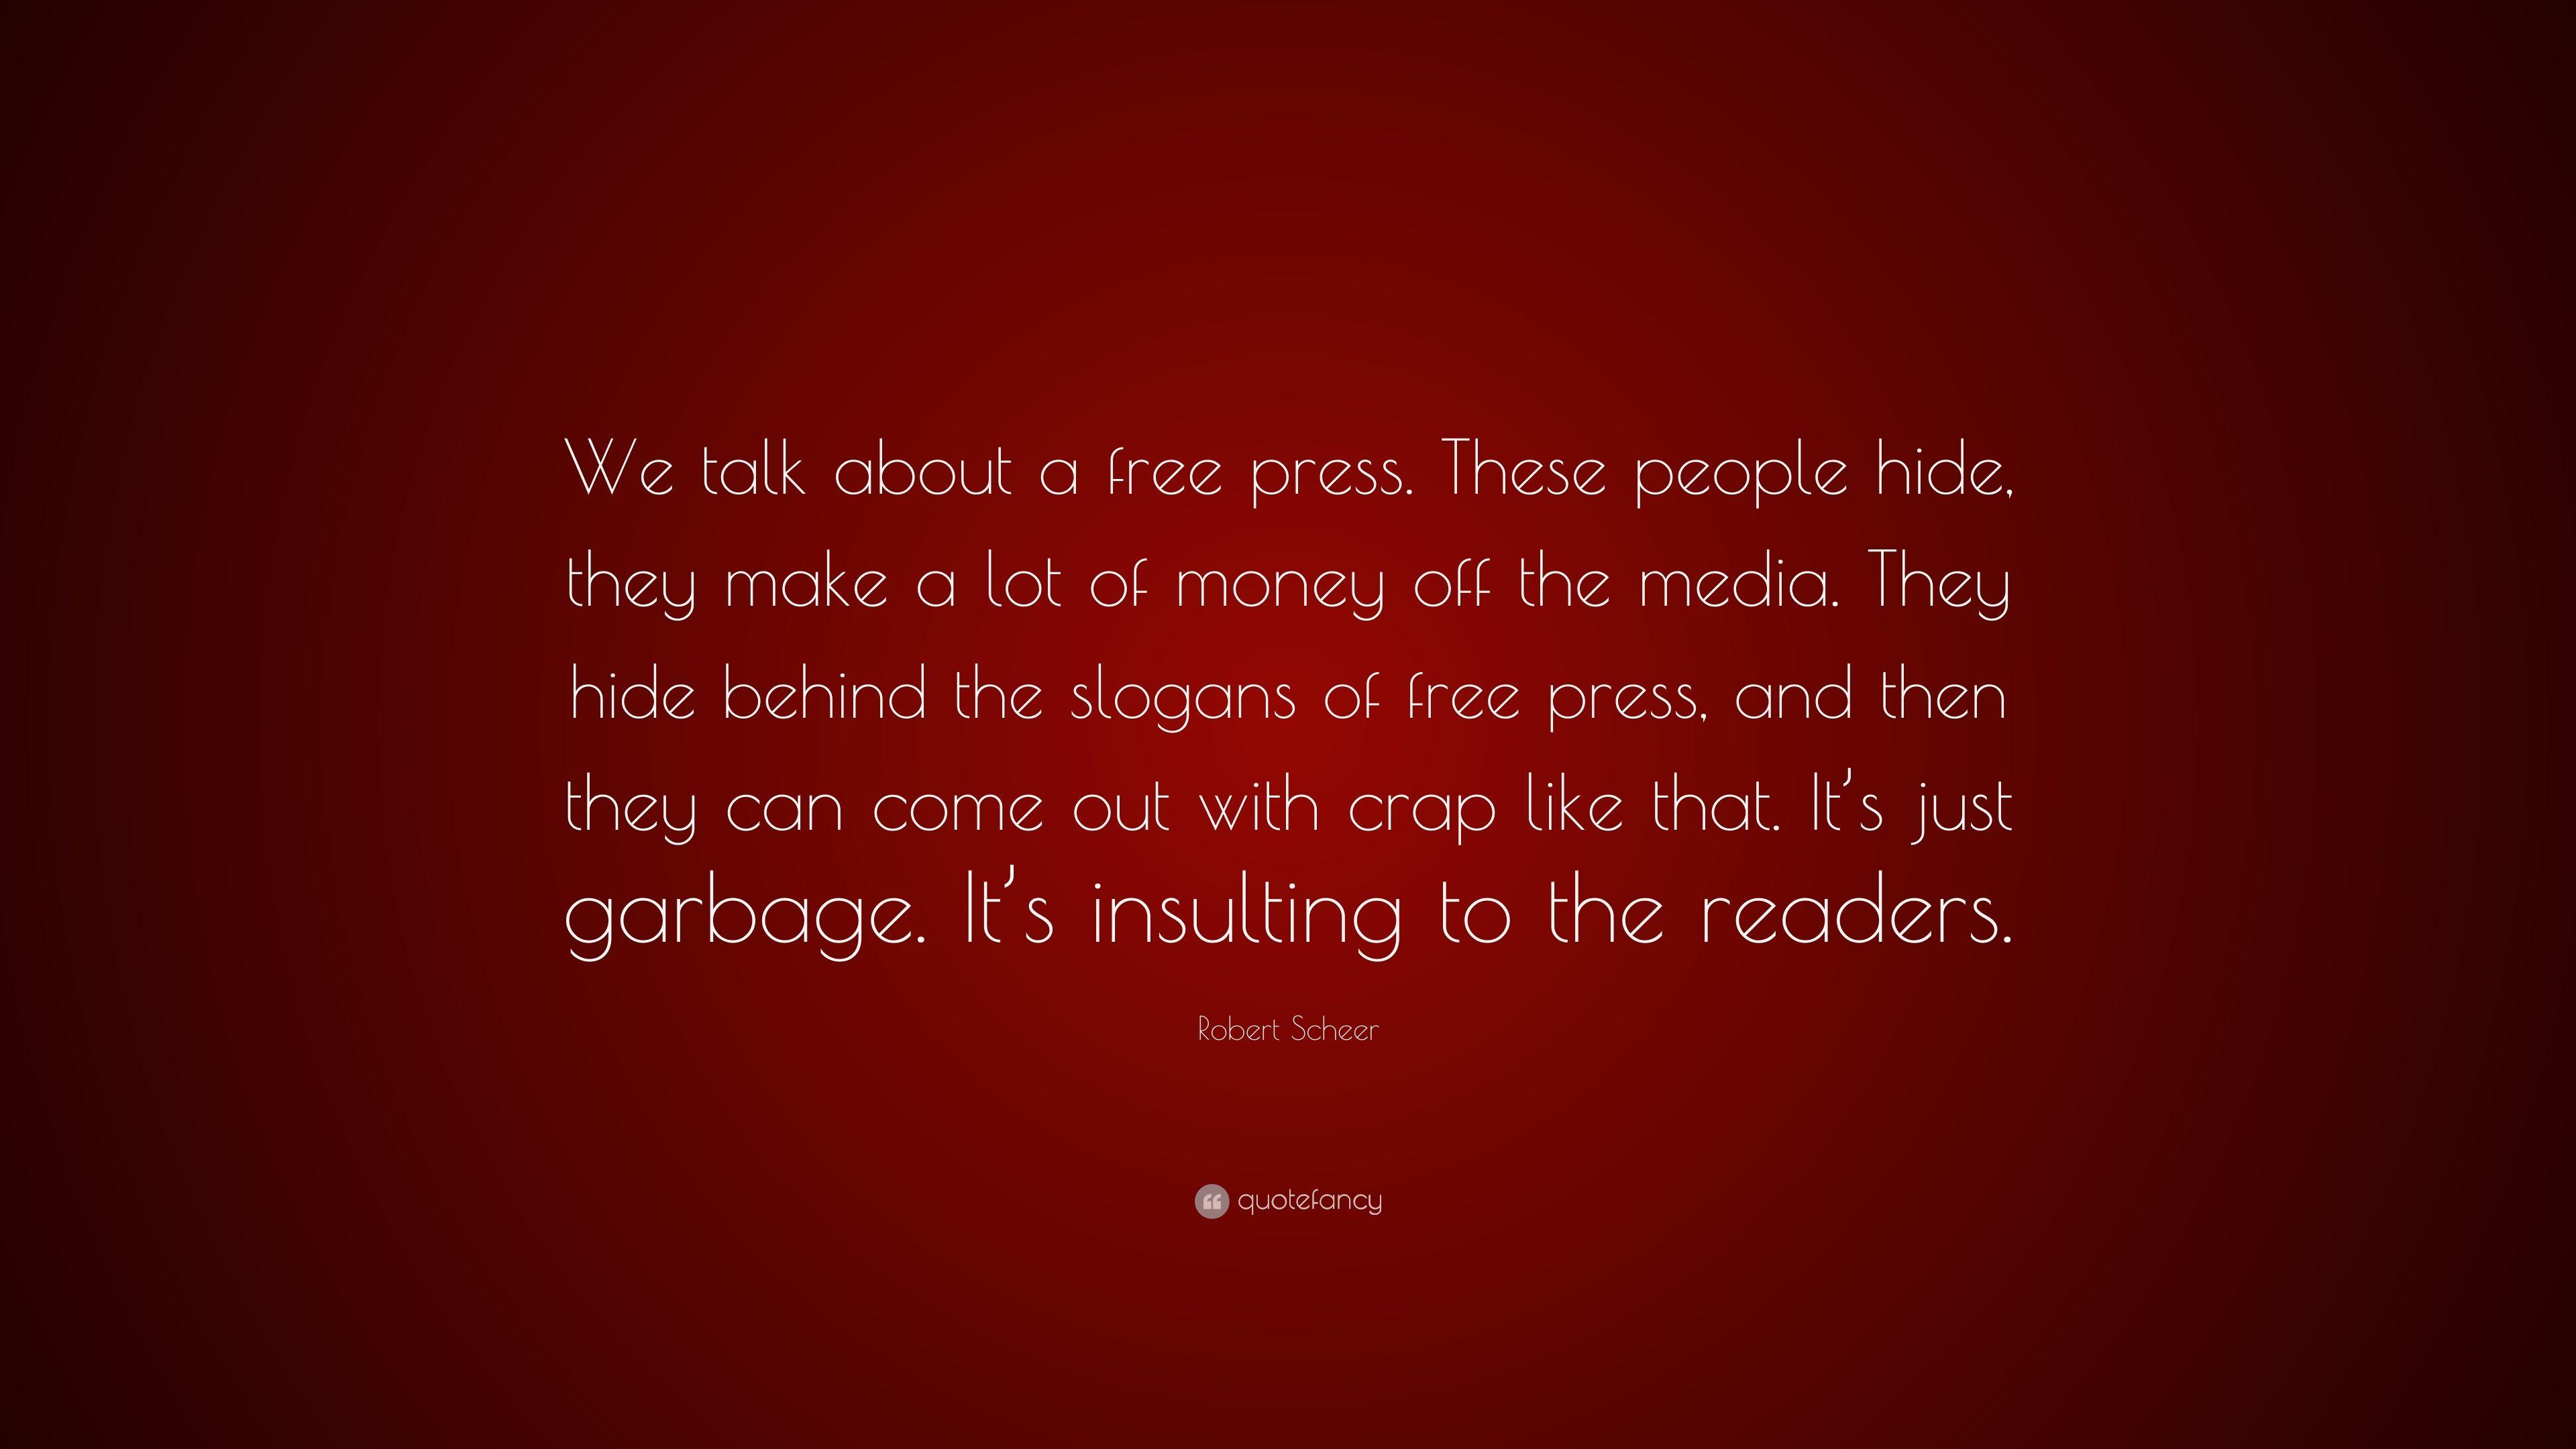 Robert Scheer Quote: “We talk about a free press. These people hide